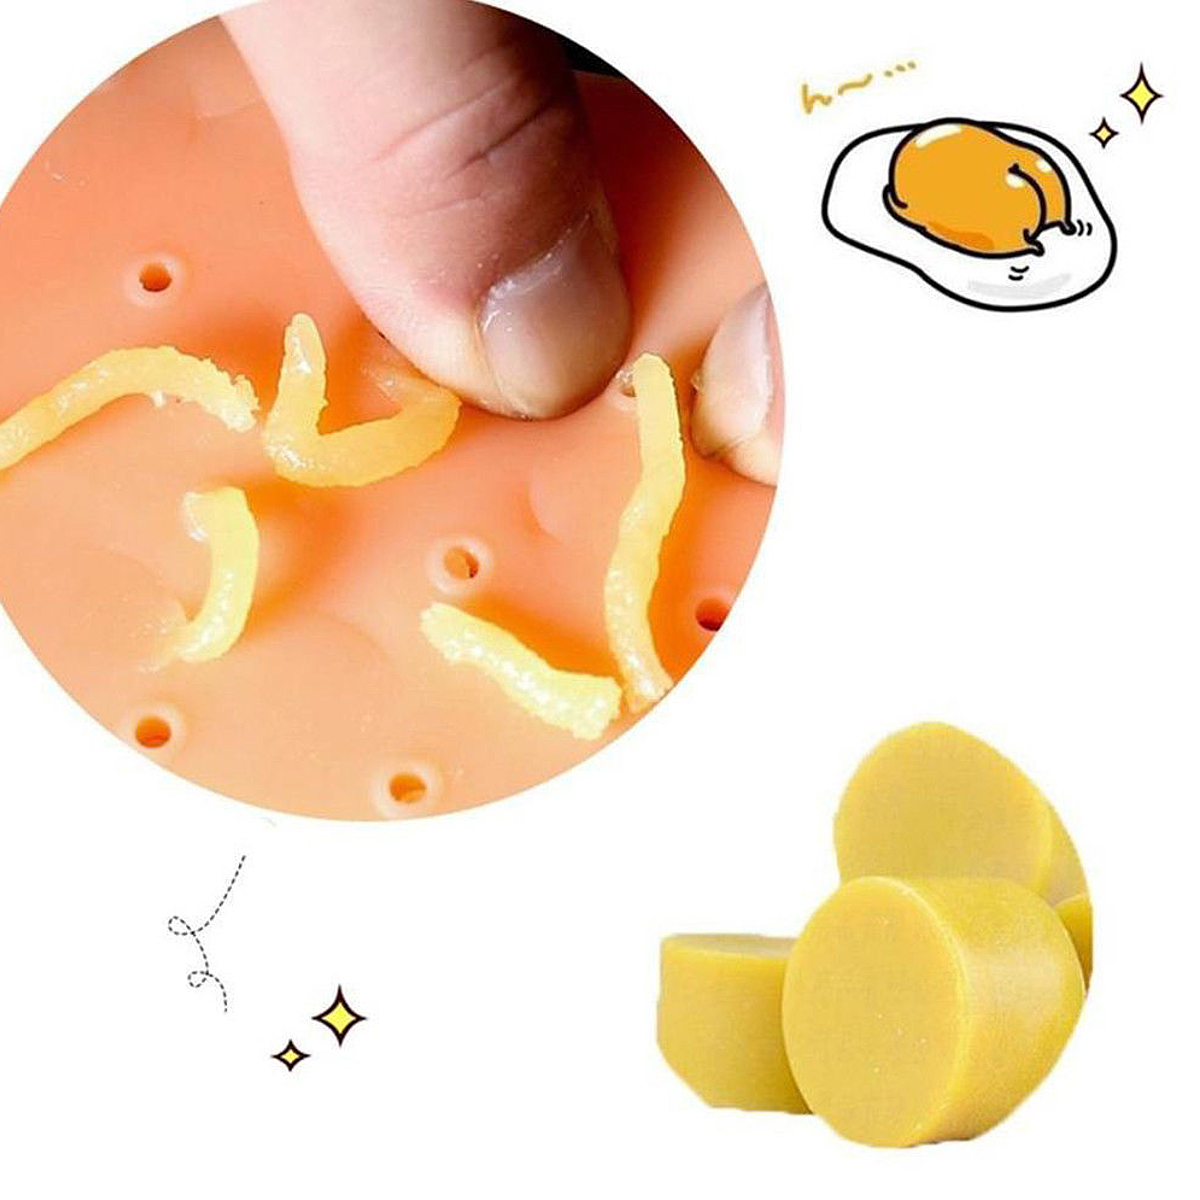 Unique-Squeeze-Acne-Toys-Pimple-Kit-Funny-Toy-Pops-It-Pal-Remover-Zit-Decompression-Stress-Tool-1389413